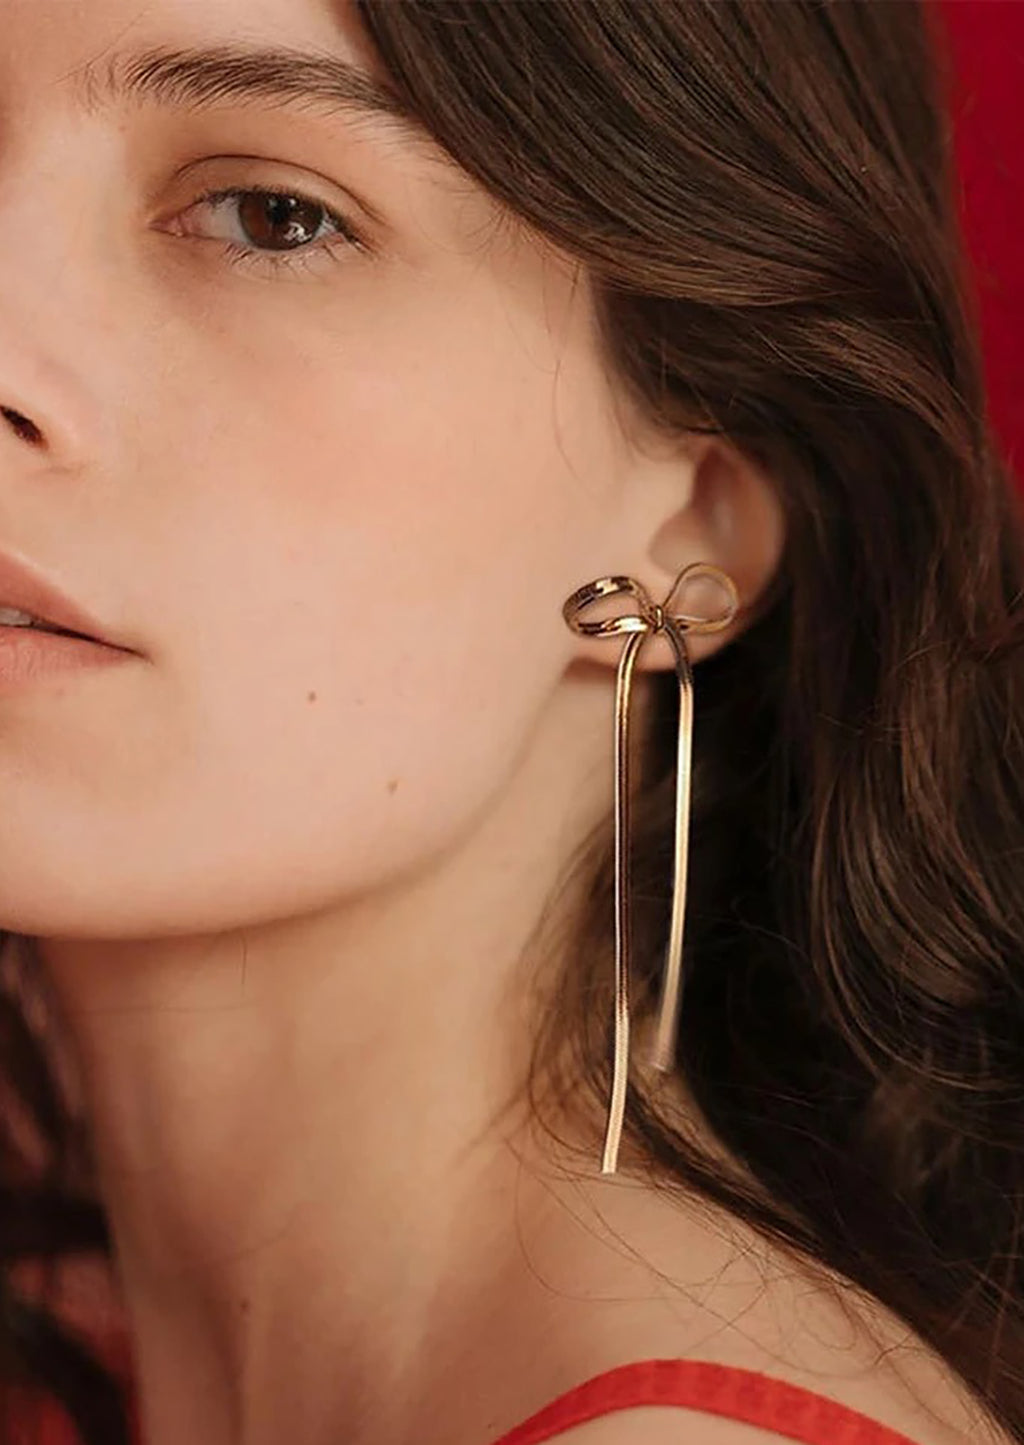 Gold / Long: A bow shaped earring made of gold snake chain material.